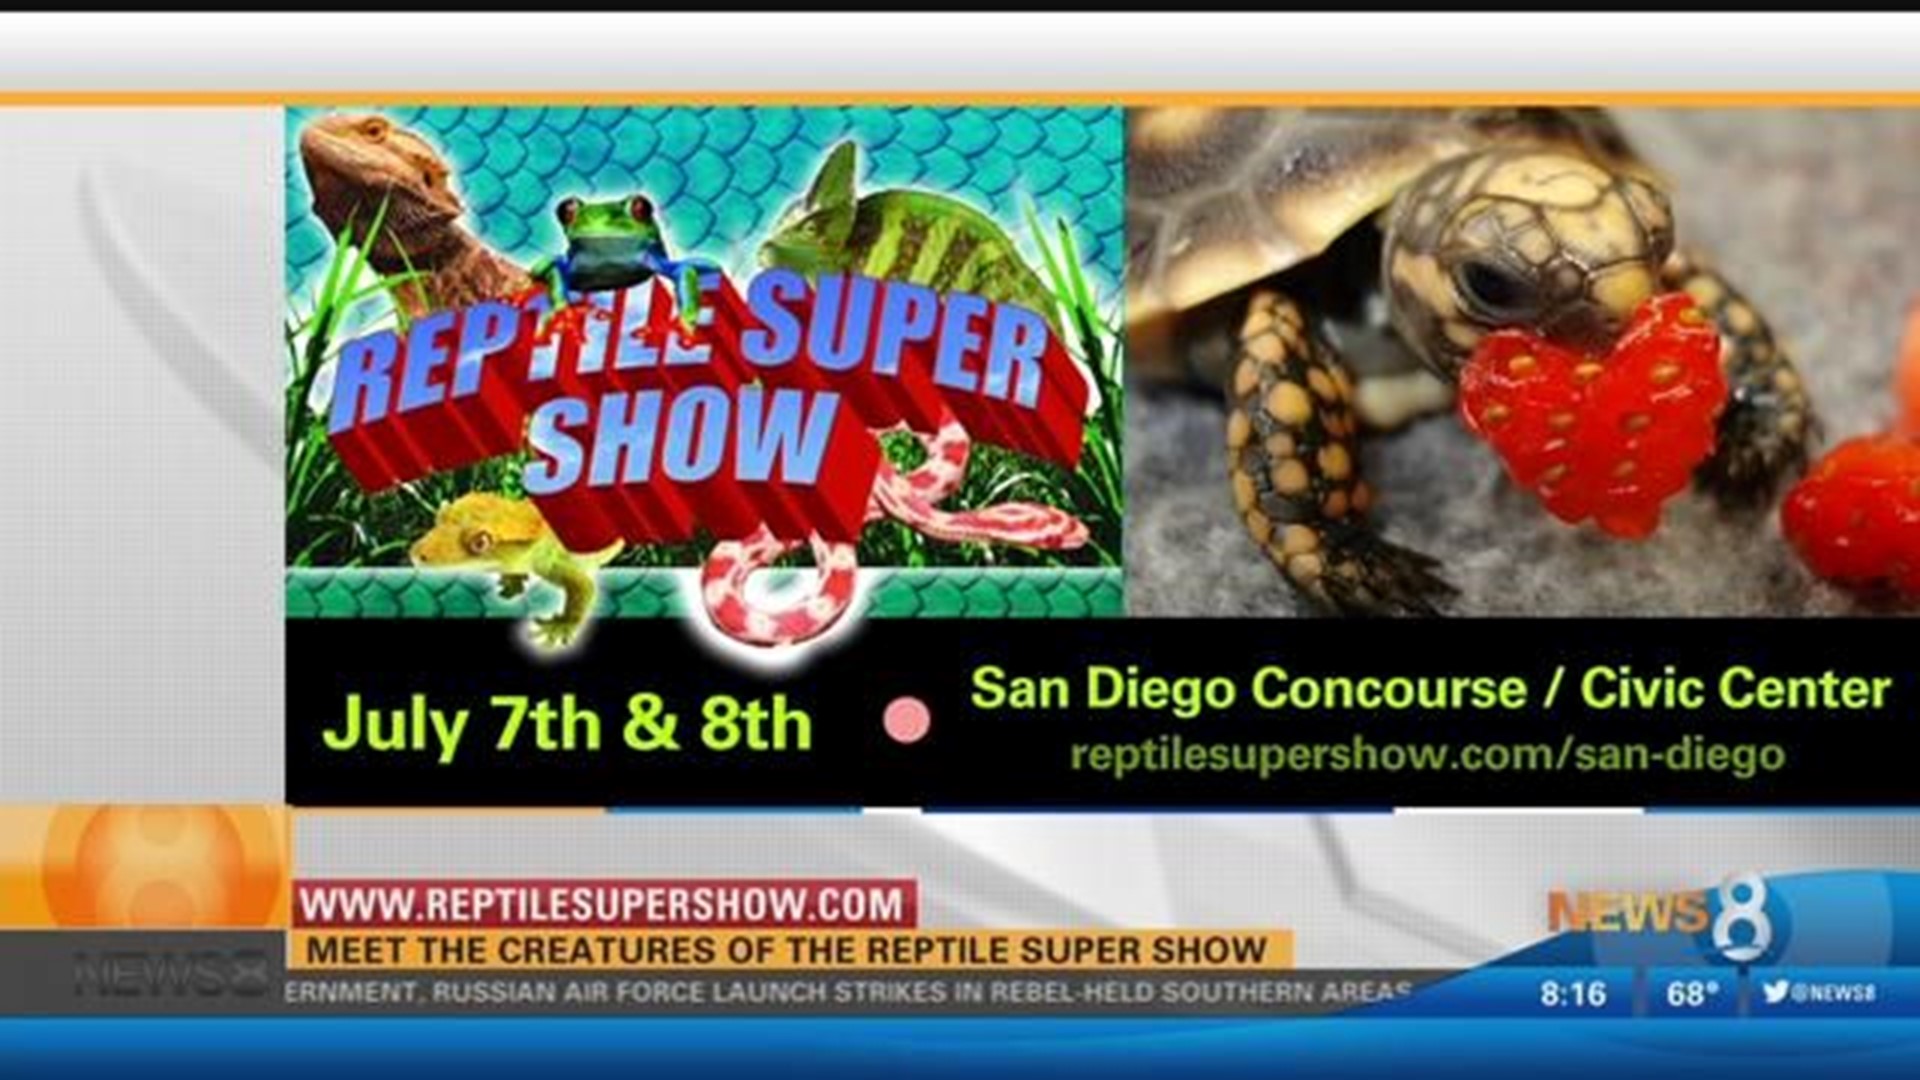 The Super Reptile Show is coming to San Diego